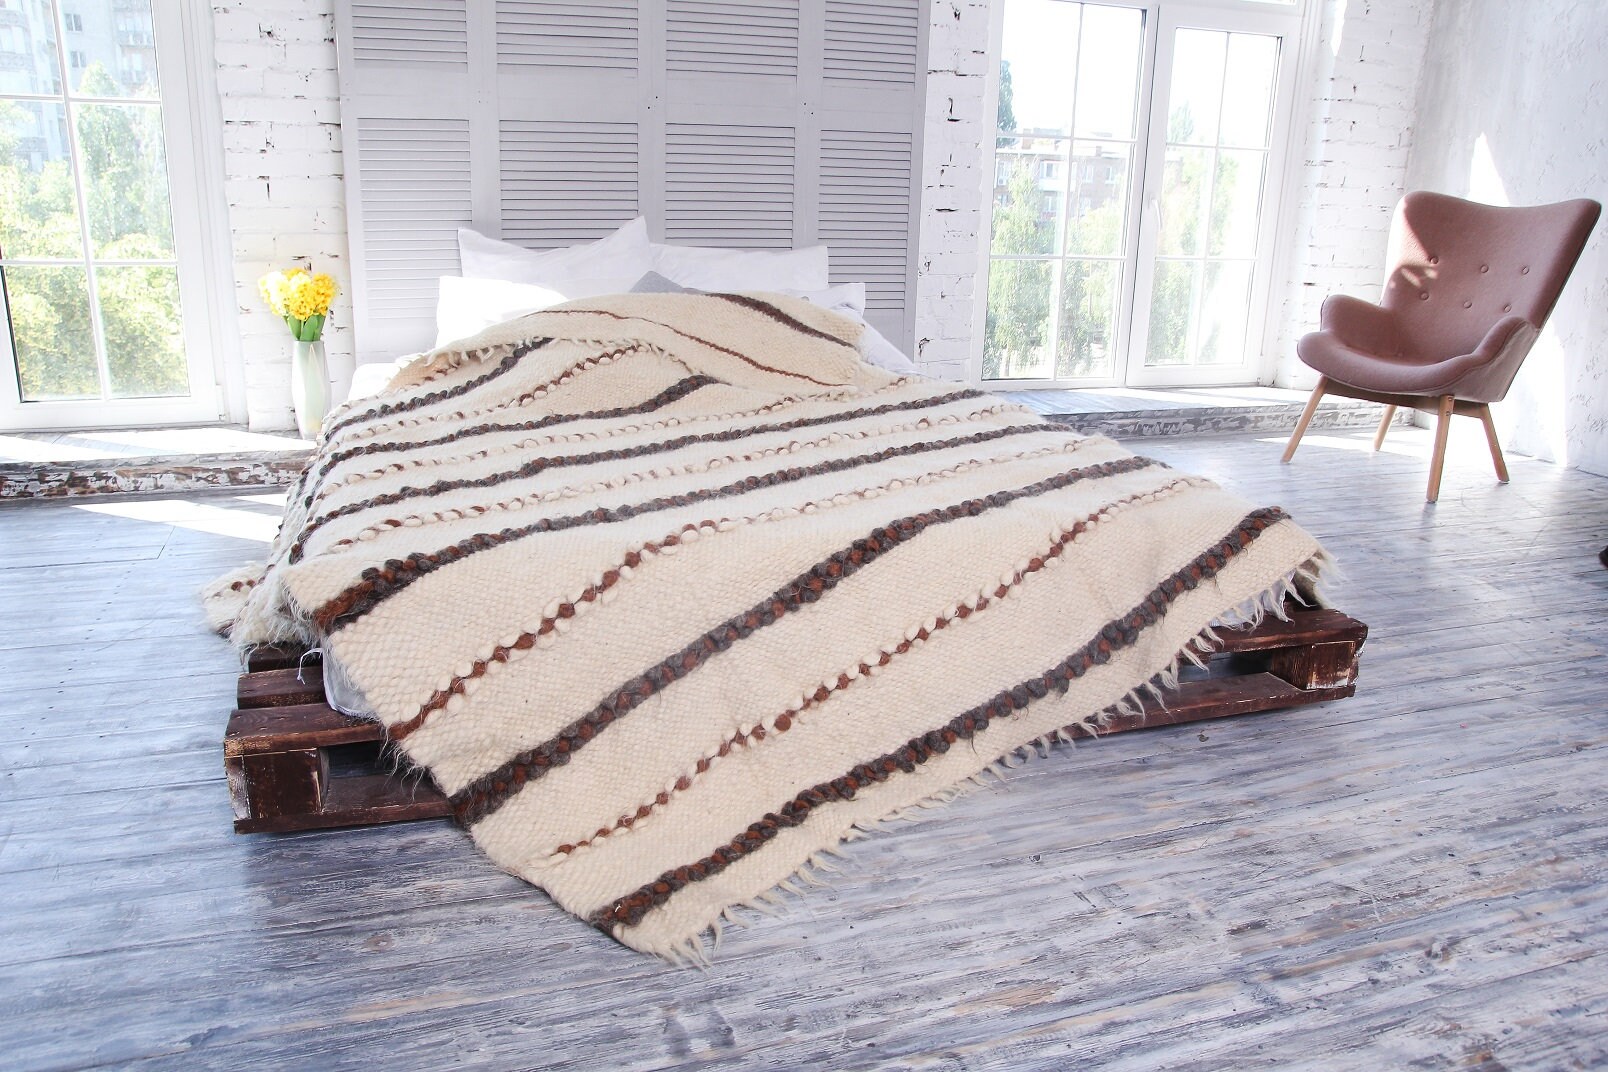 White Wool Blanket Heavy Striped Throw Queen Size Warm Bed Coverlet Decorative Plaid For Couch Living Room Decor Housewarming Gift 